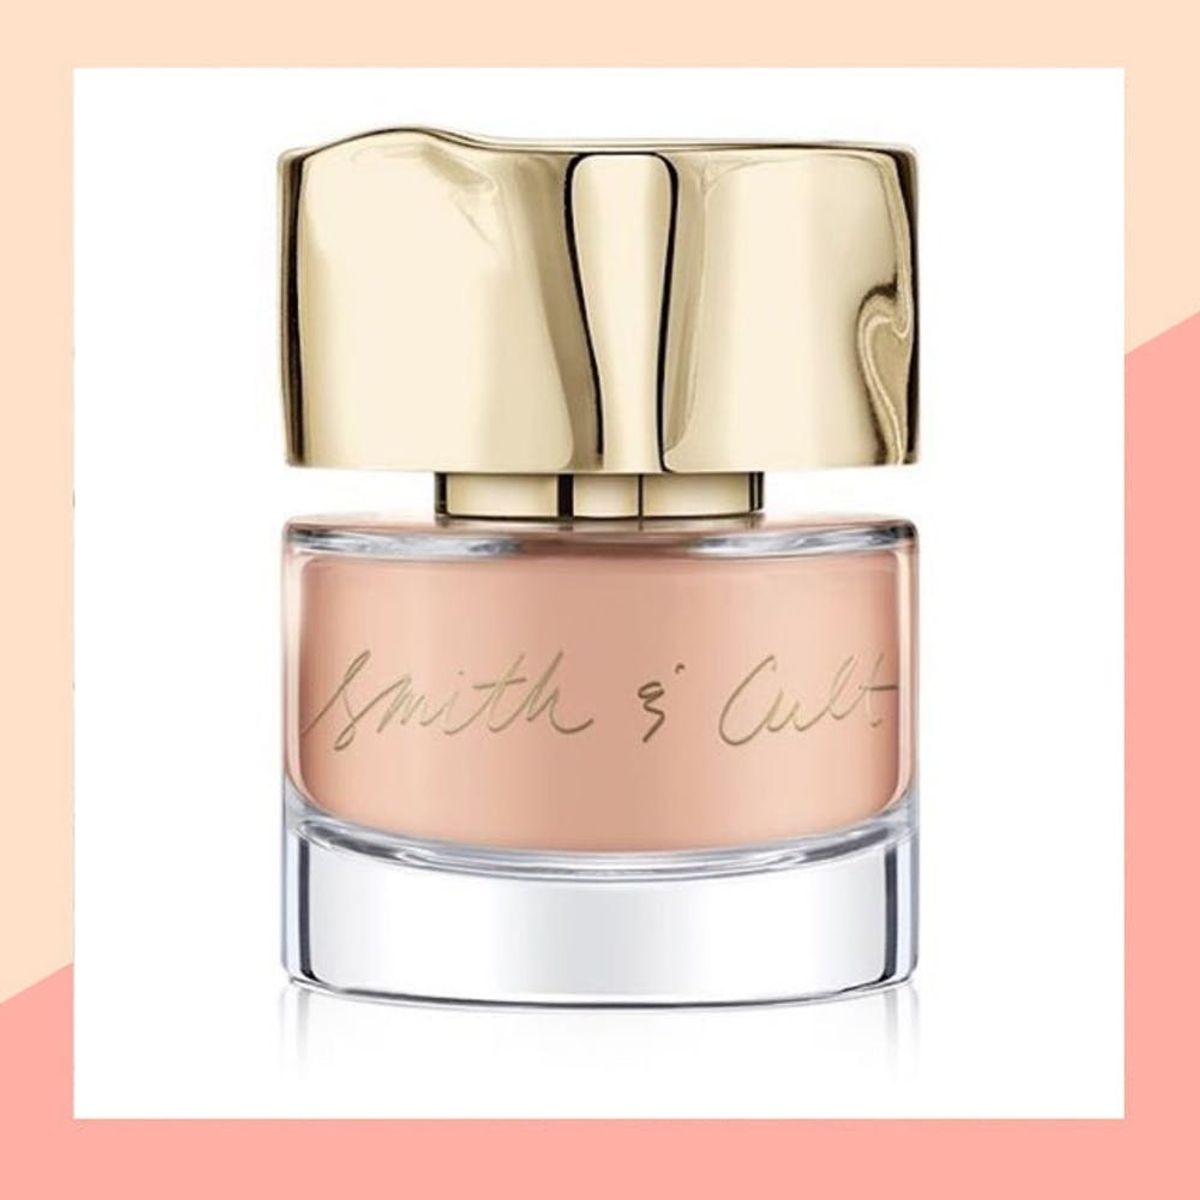 14 Beauty Products That Help You Master the Nude Look